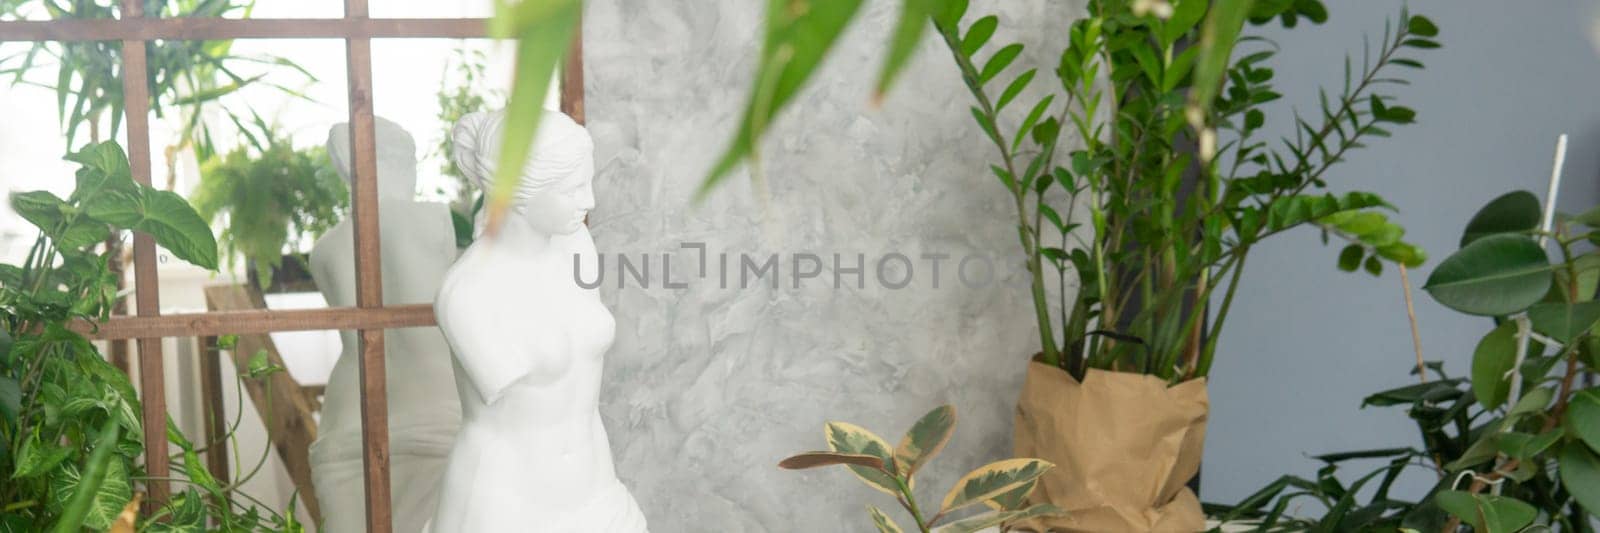 A fragment of the interior with a variety of indoor plants and plaster sculptures. Urban jungle concept. Biophilia design. by Annu1tochka